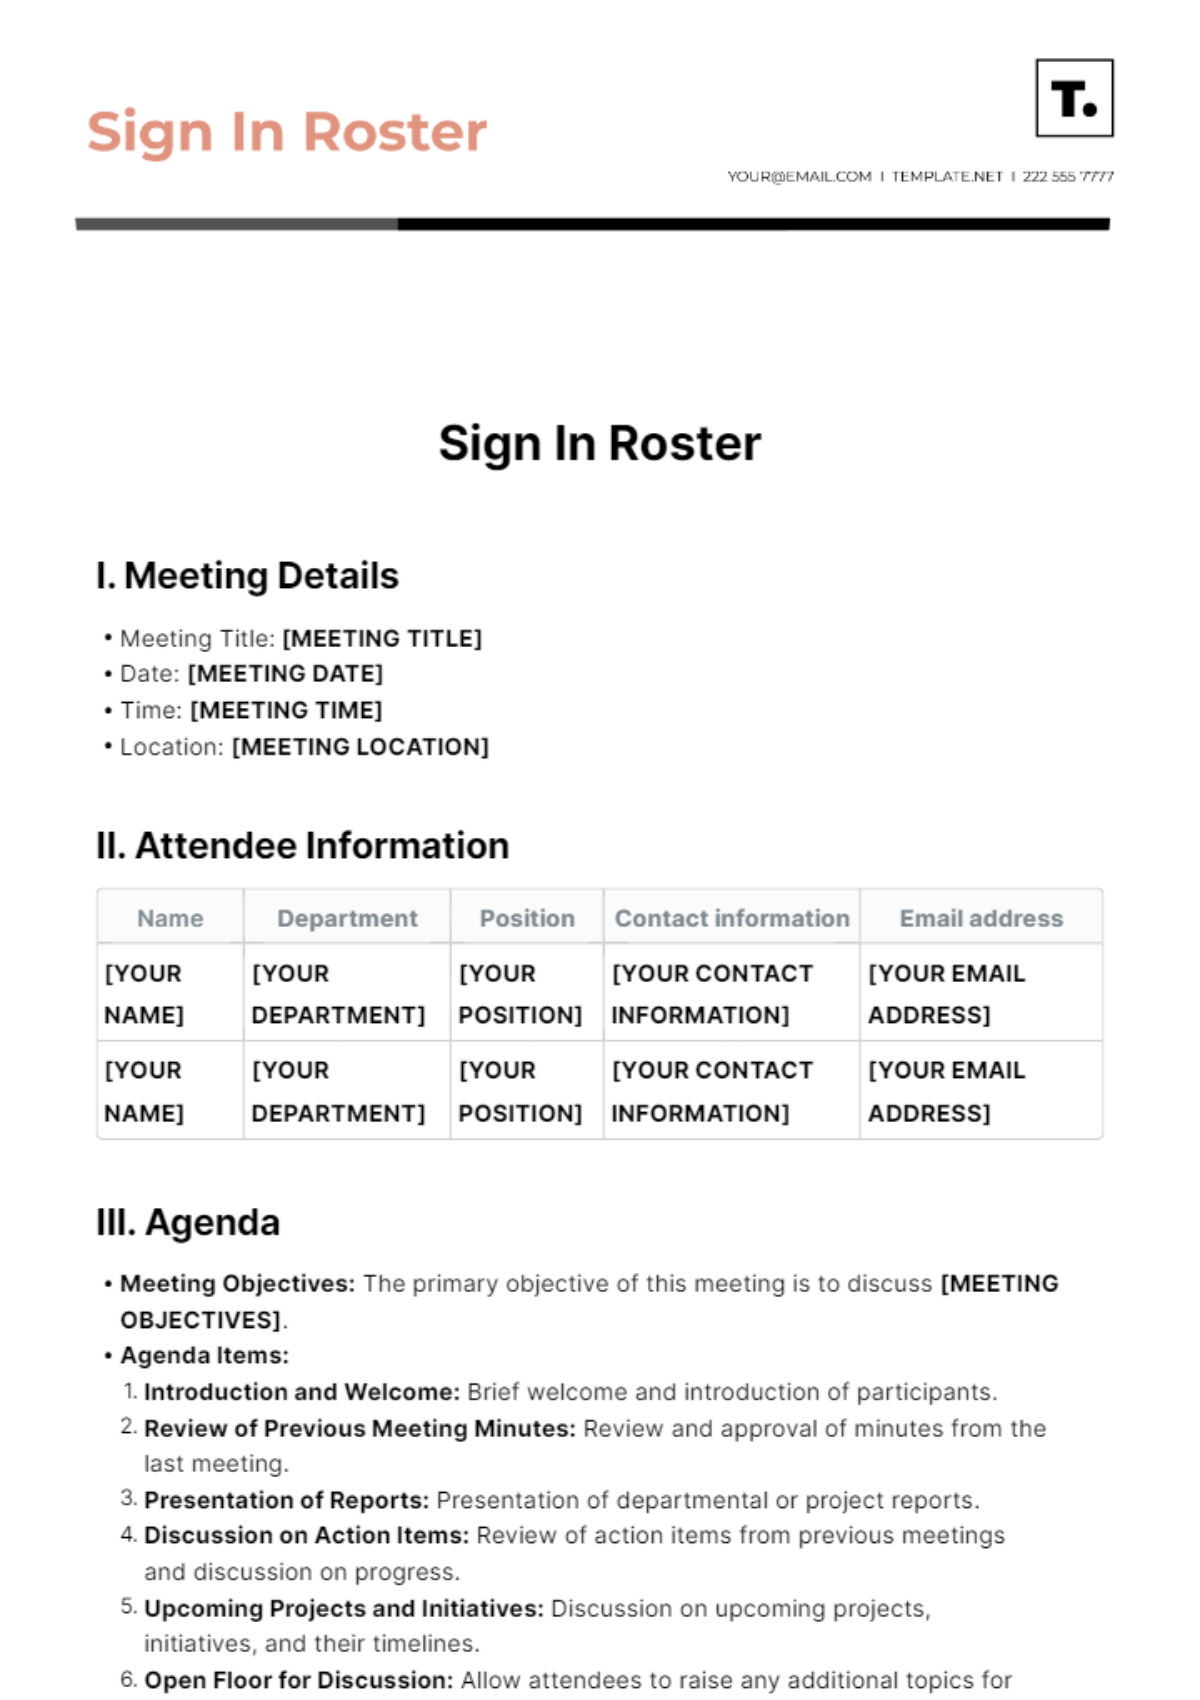 Sign In Roster Template